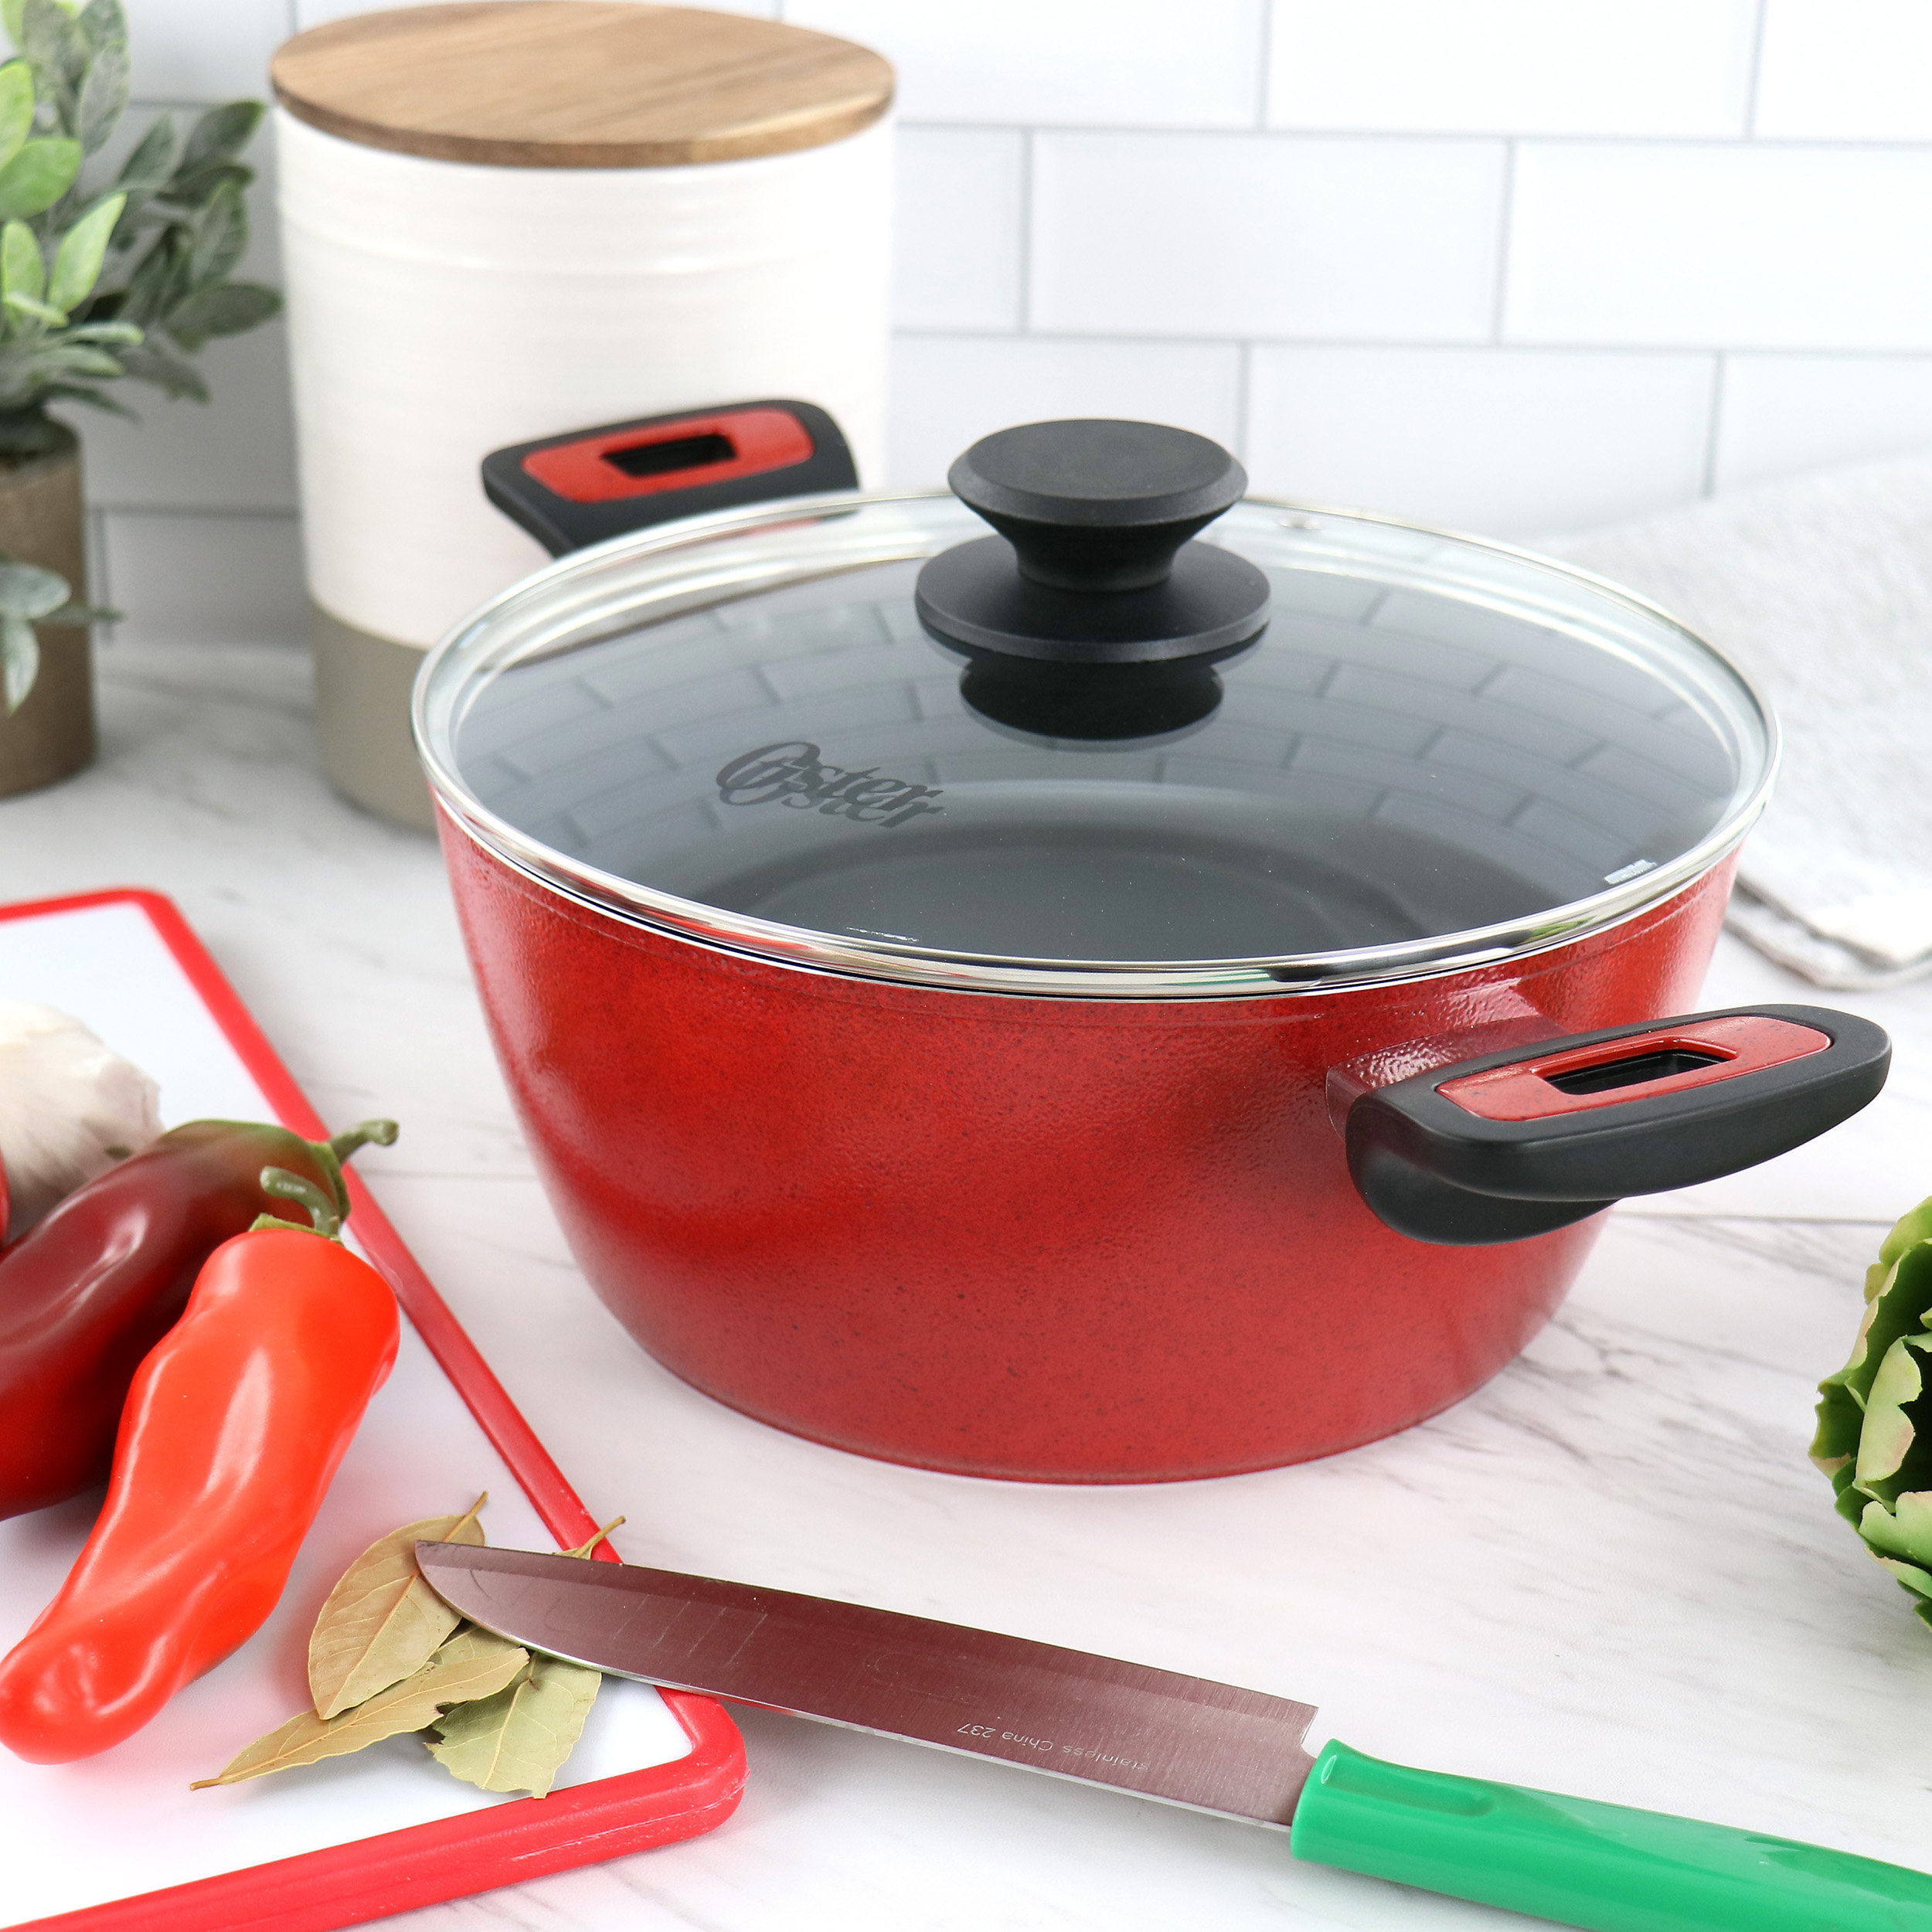 Better Chef 4 qt. Round Aluminum Nonstick Dutch Oven in Red with